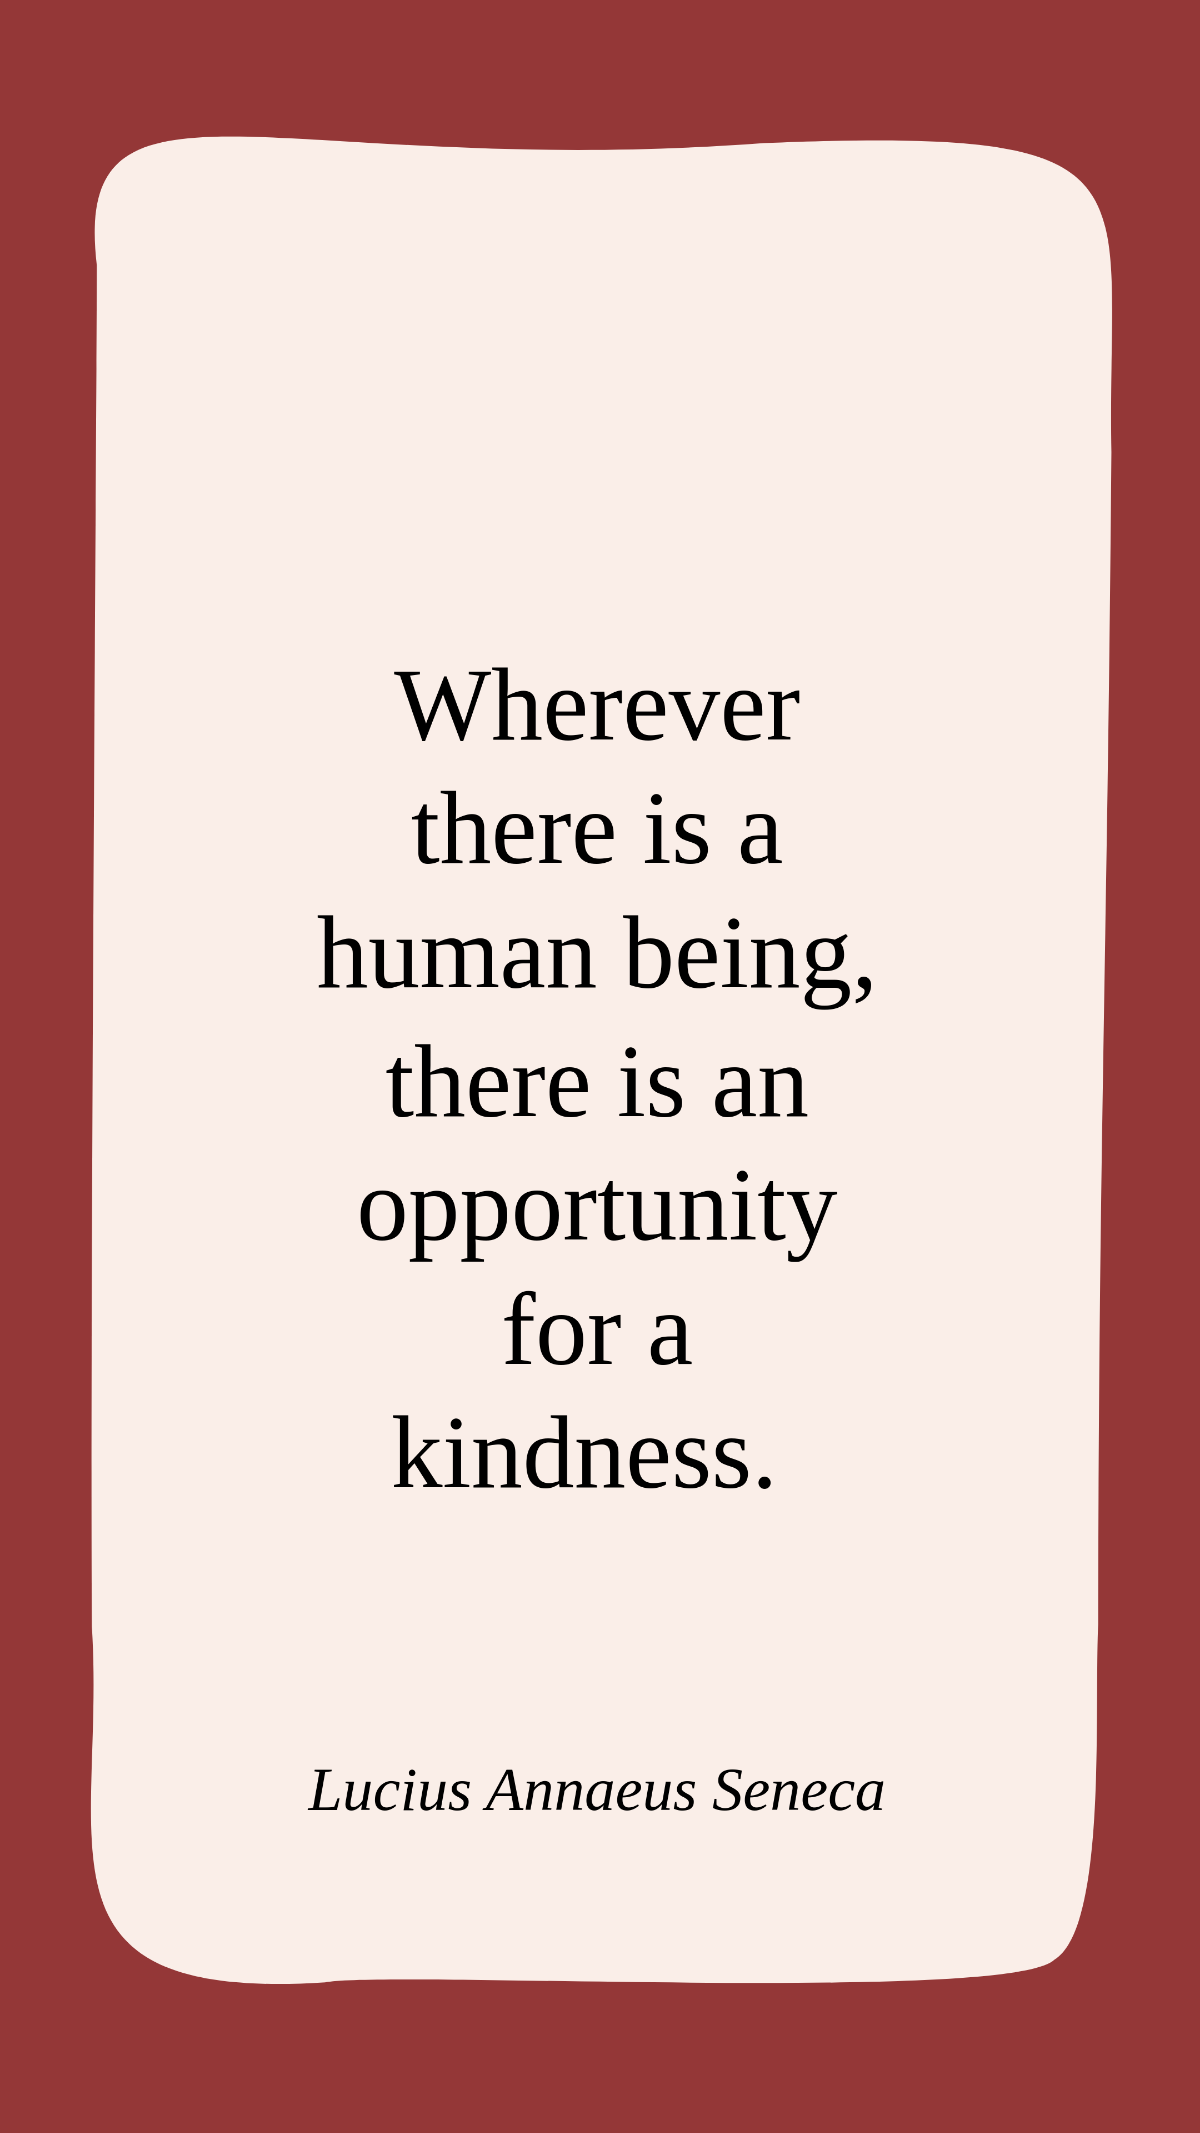 Lucius Annaeus Seneca - Wherever there is a human being, there is an opportunity for a kindness. Template